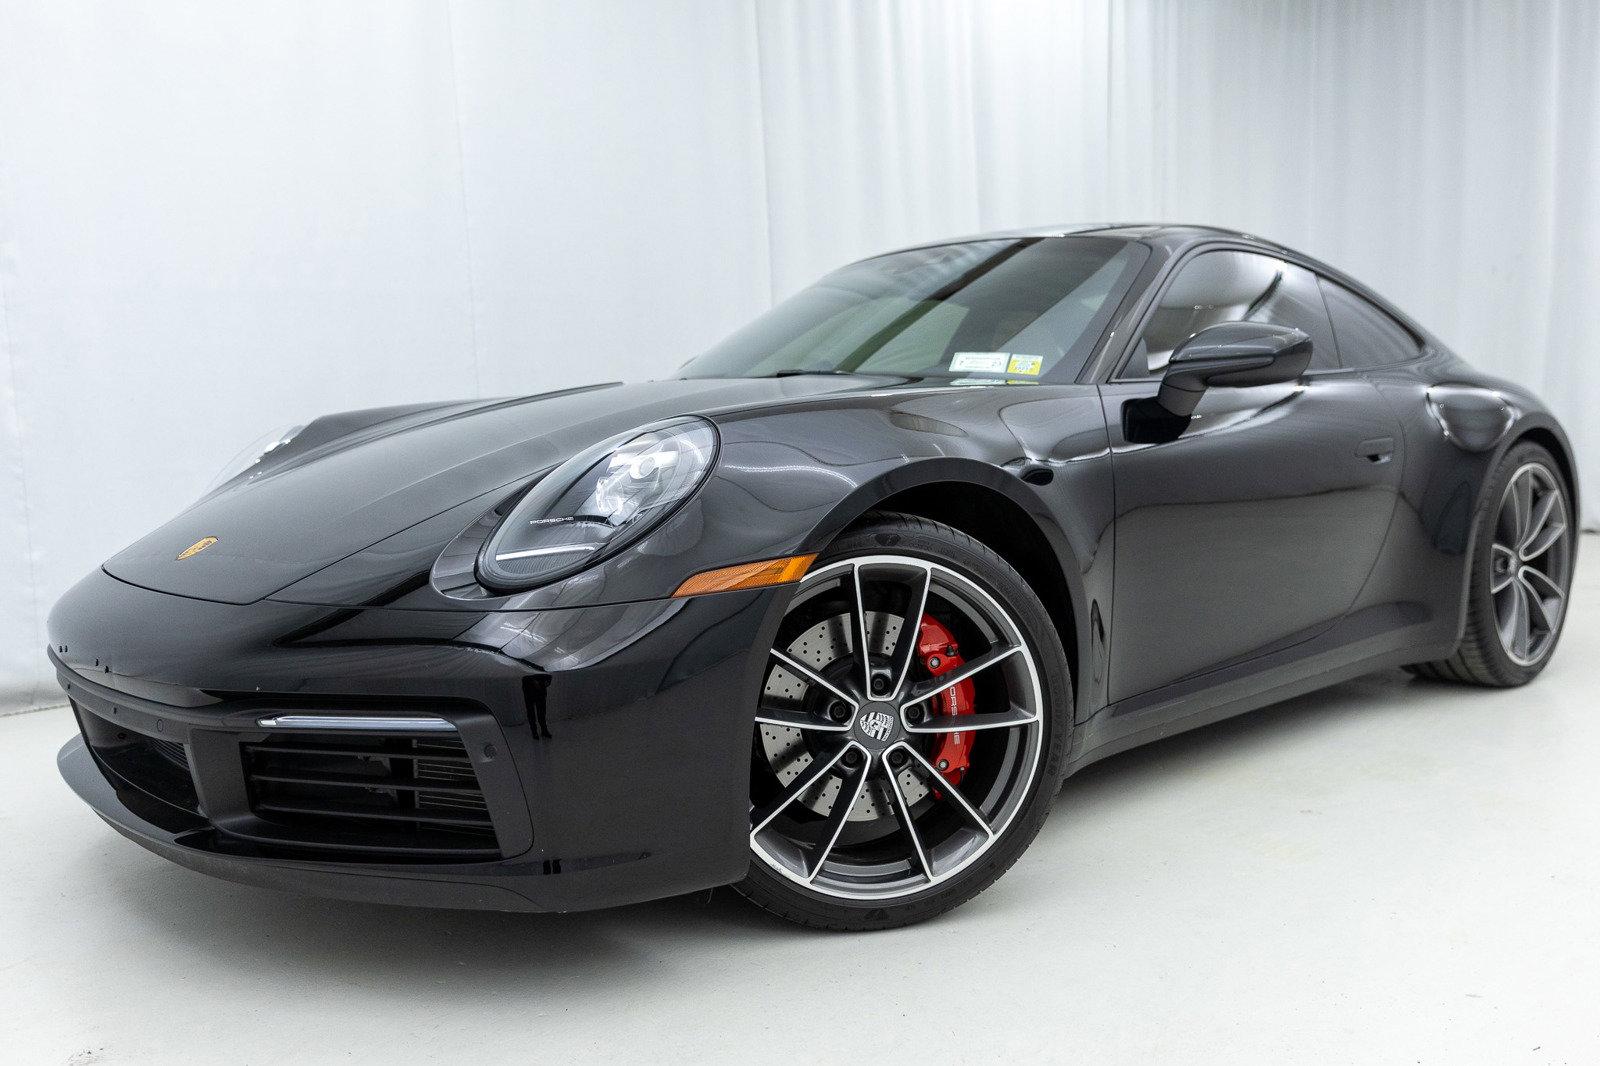 Used 2021 Porsche 911 Carrera 4S 7-Speed Manual For Sale ($145,950) |  Motorcars of the Main Line Stock #S223007